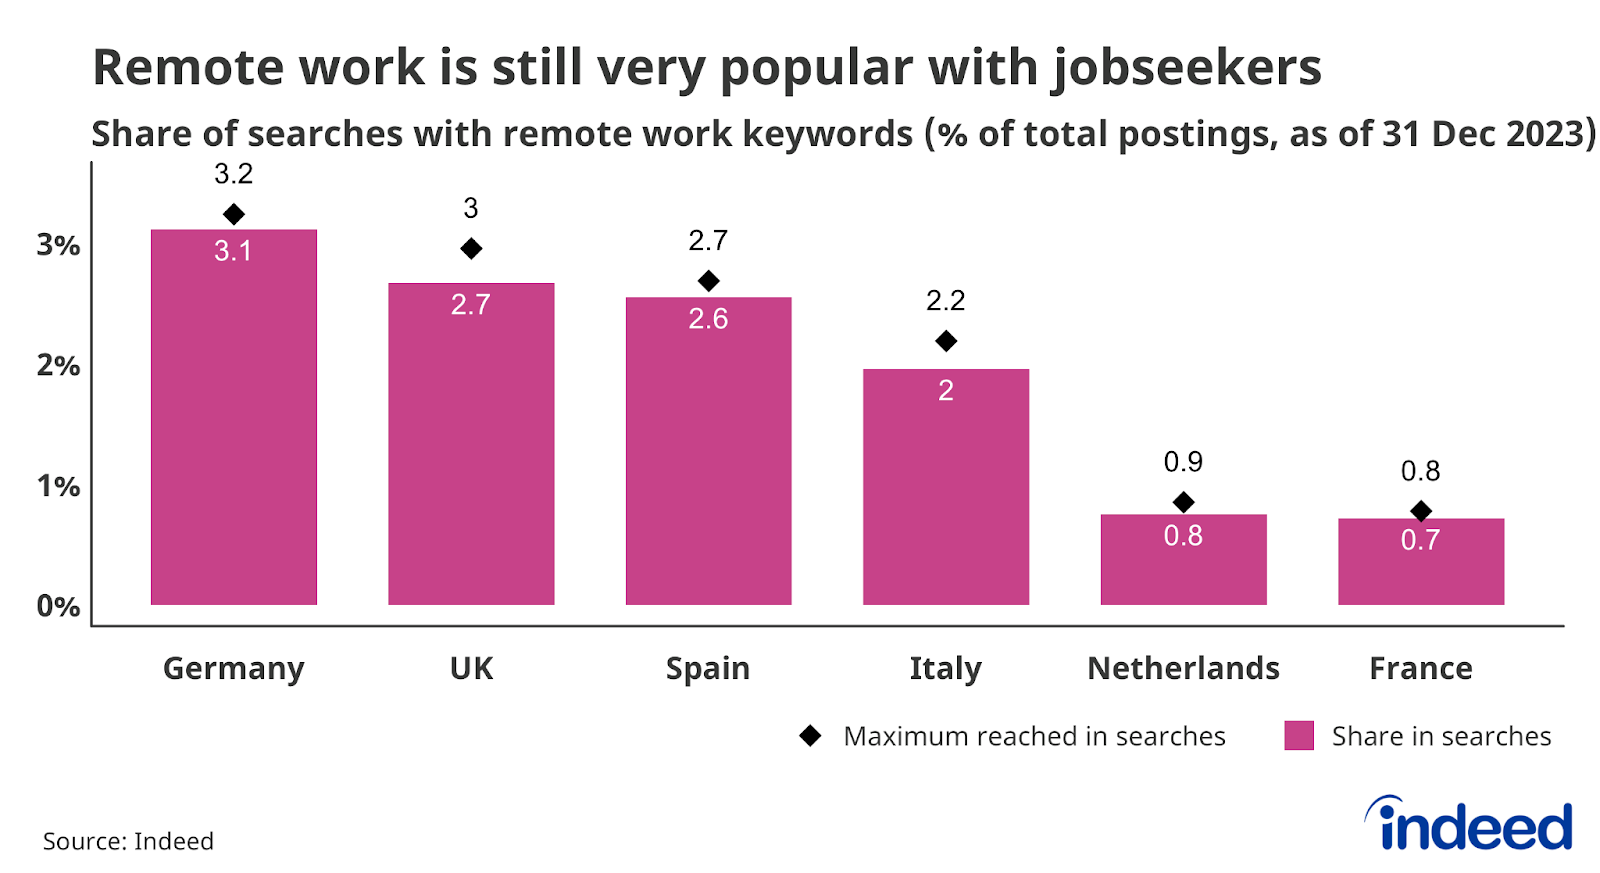 Bar chart titled "Remote work is still very popular with jobseekers" shows the proportion of searches on Indeed containing remote work-related keywords for Spain, the United Kingdom, Germany, France, the Netherlands, and Italy, as of 31 December 2023, alongside their highest levels reached during the 2019-2023 period.